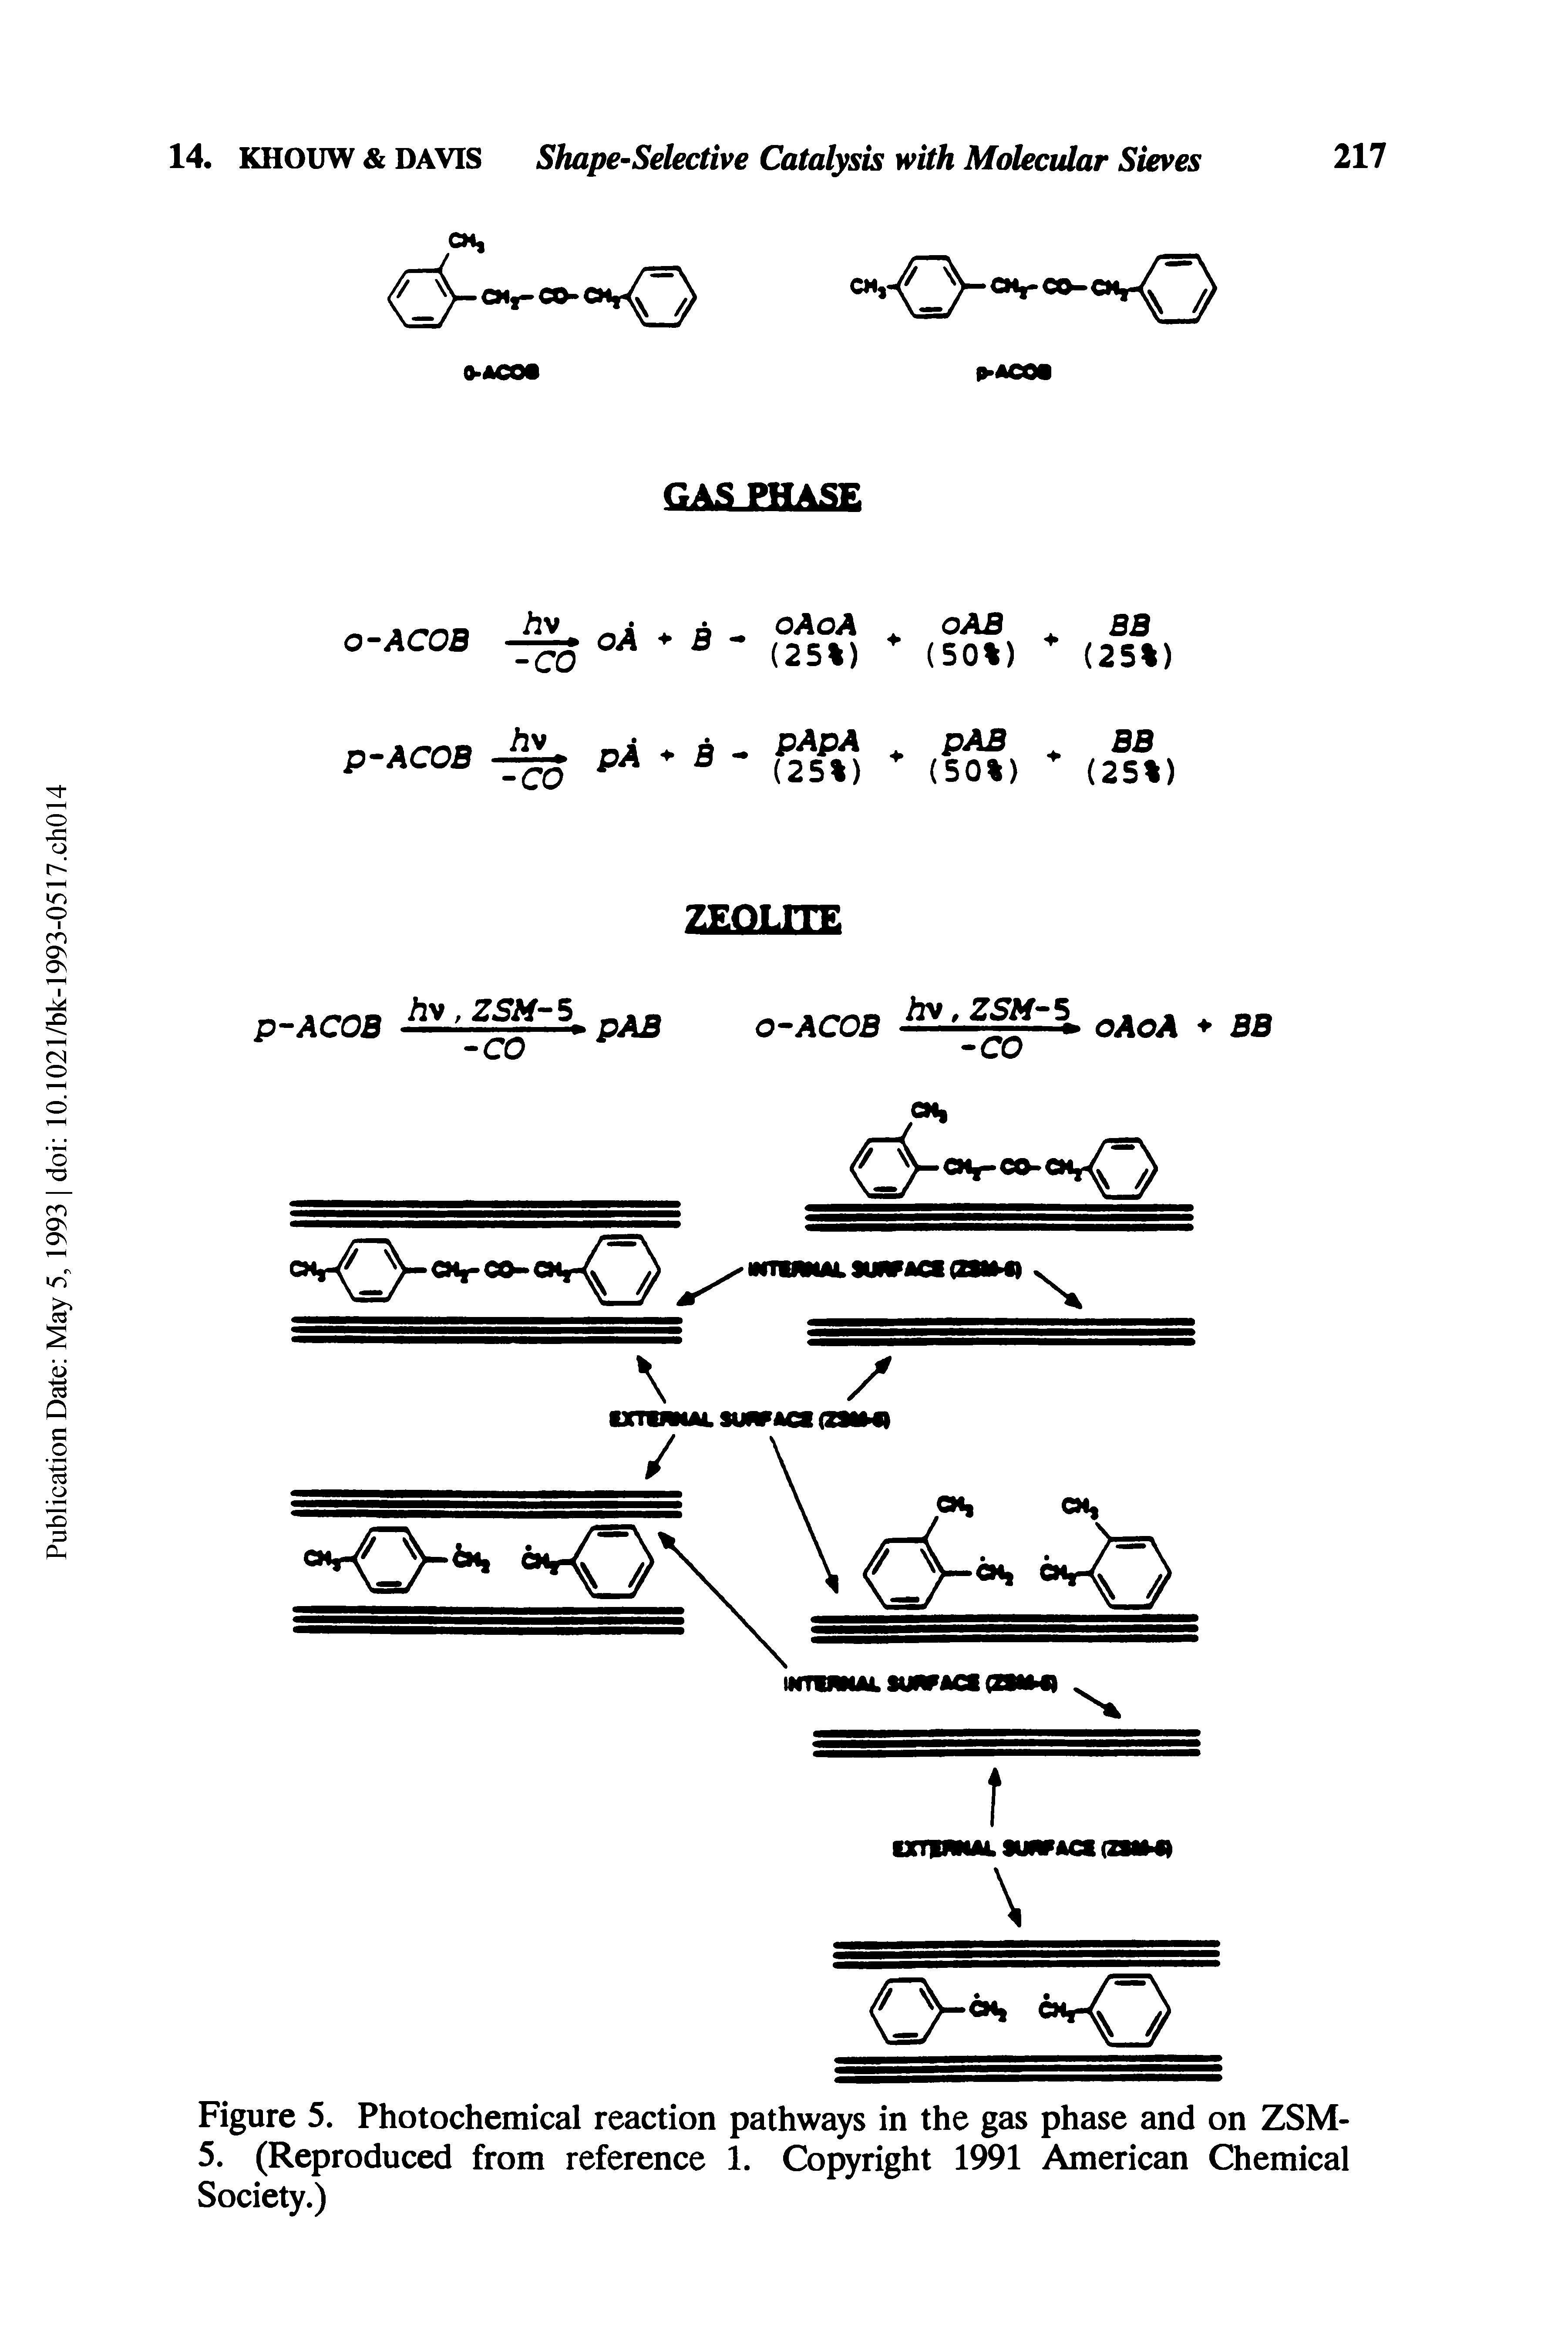 Figure 5. Photochemical reaction pathways in the gas phase and on ZSM-5. (Reproduced from reference 1. Copyright 1991 American Chemical Society.)...